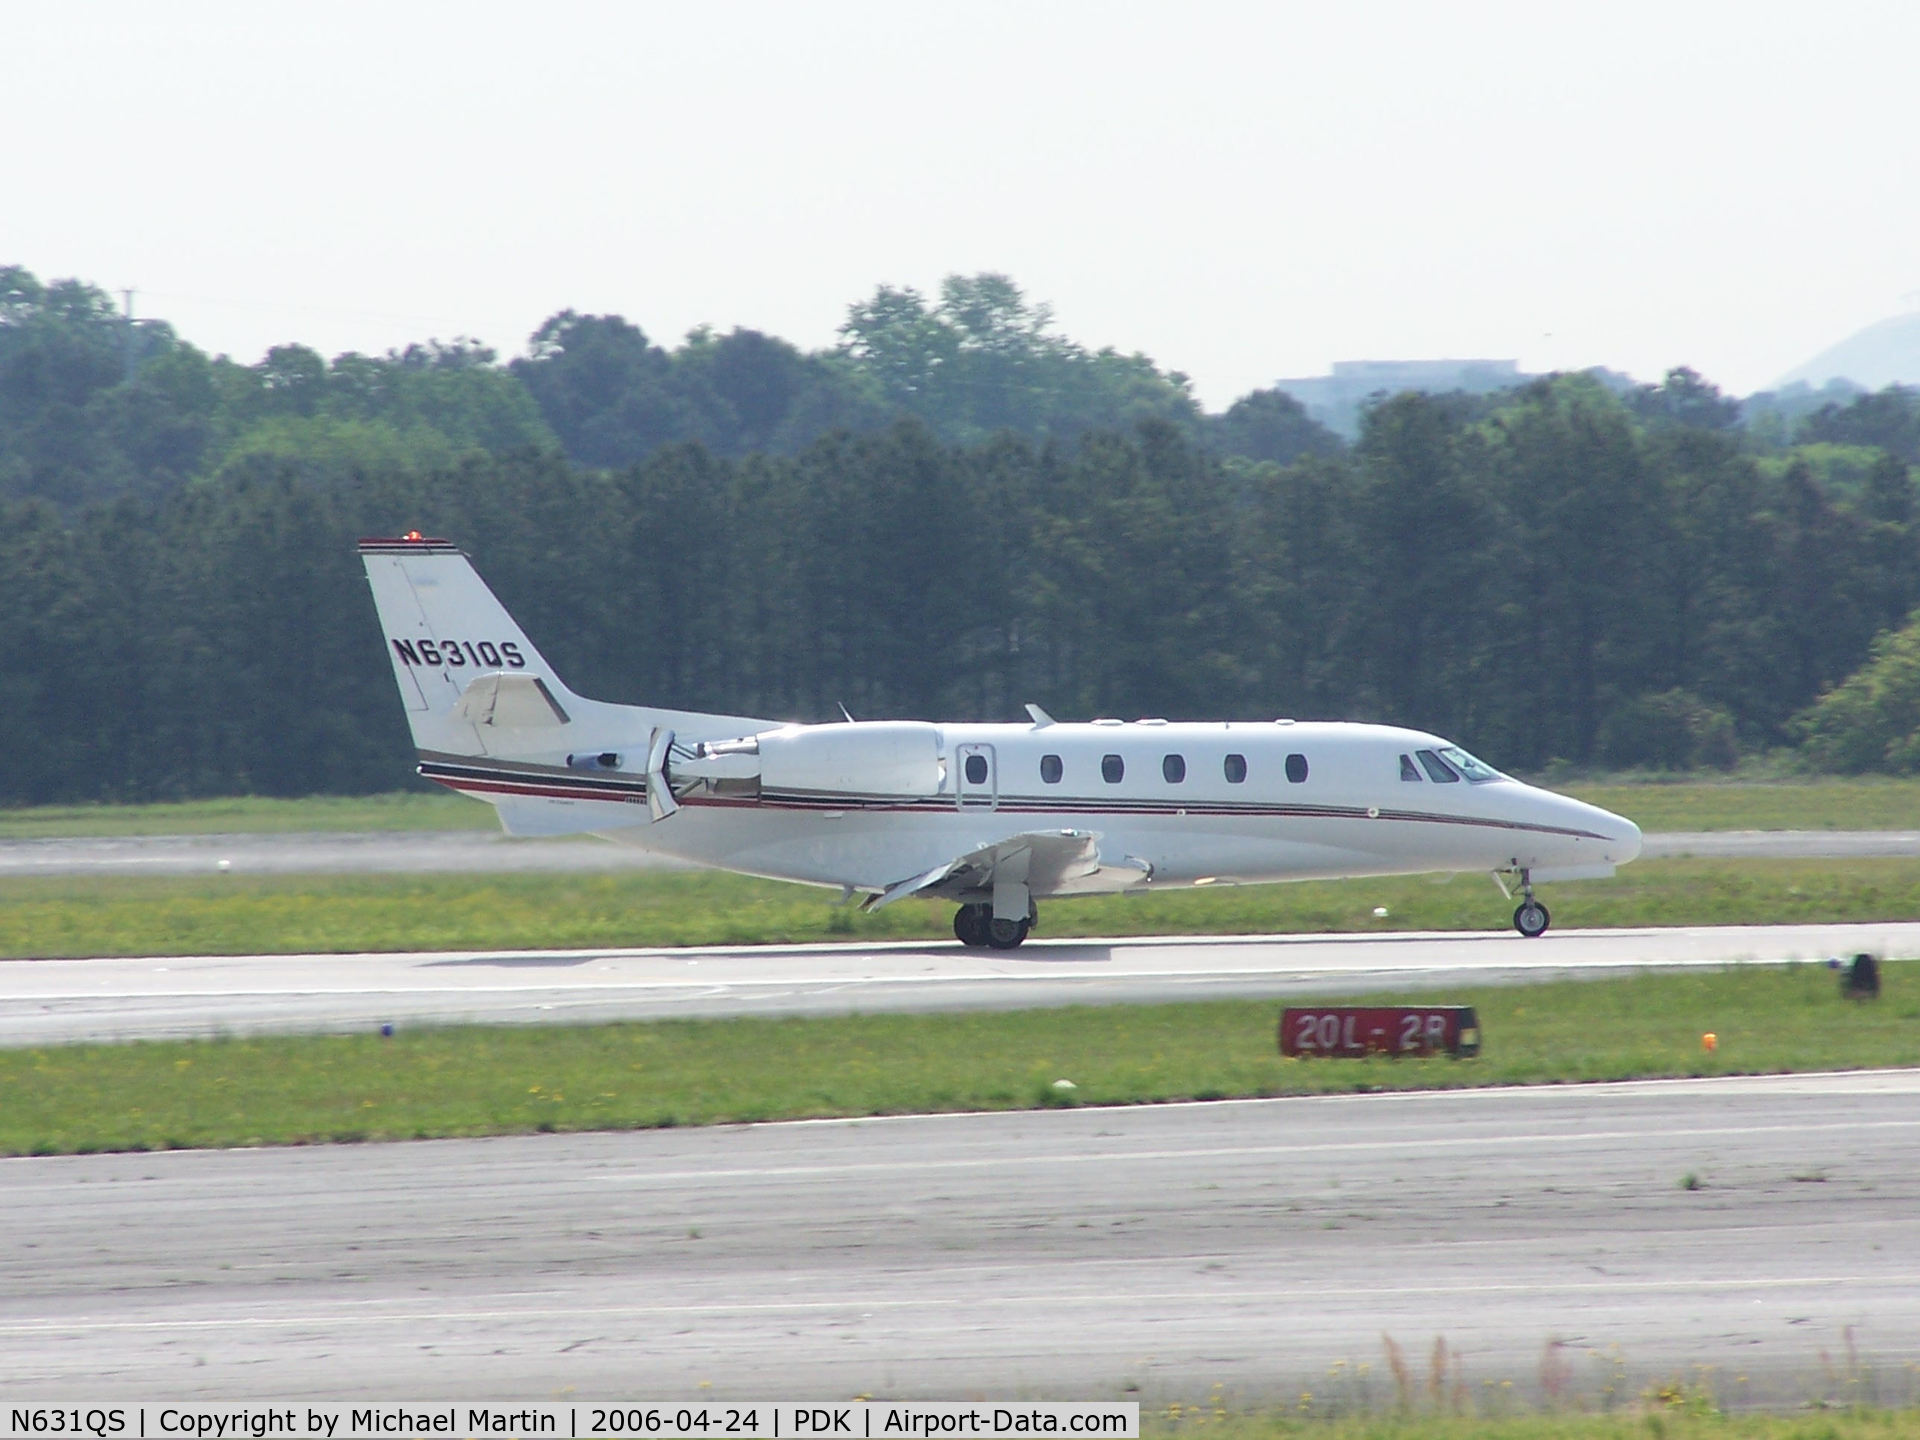 N631QS, 2000 Cessna 560XL C/N 560-5131, Landing PDK on 20L with airbrakes extended